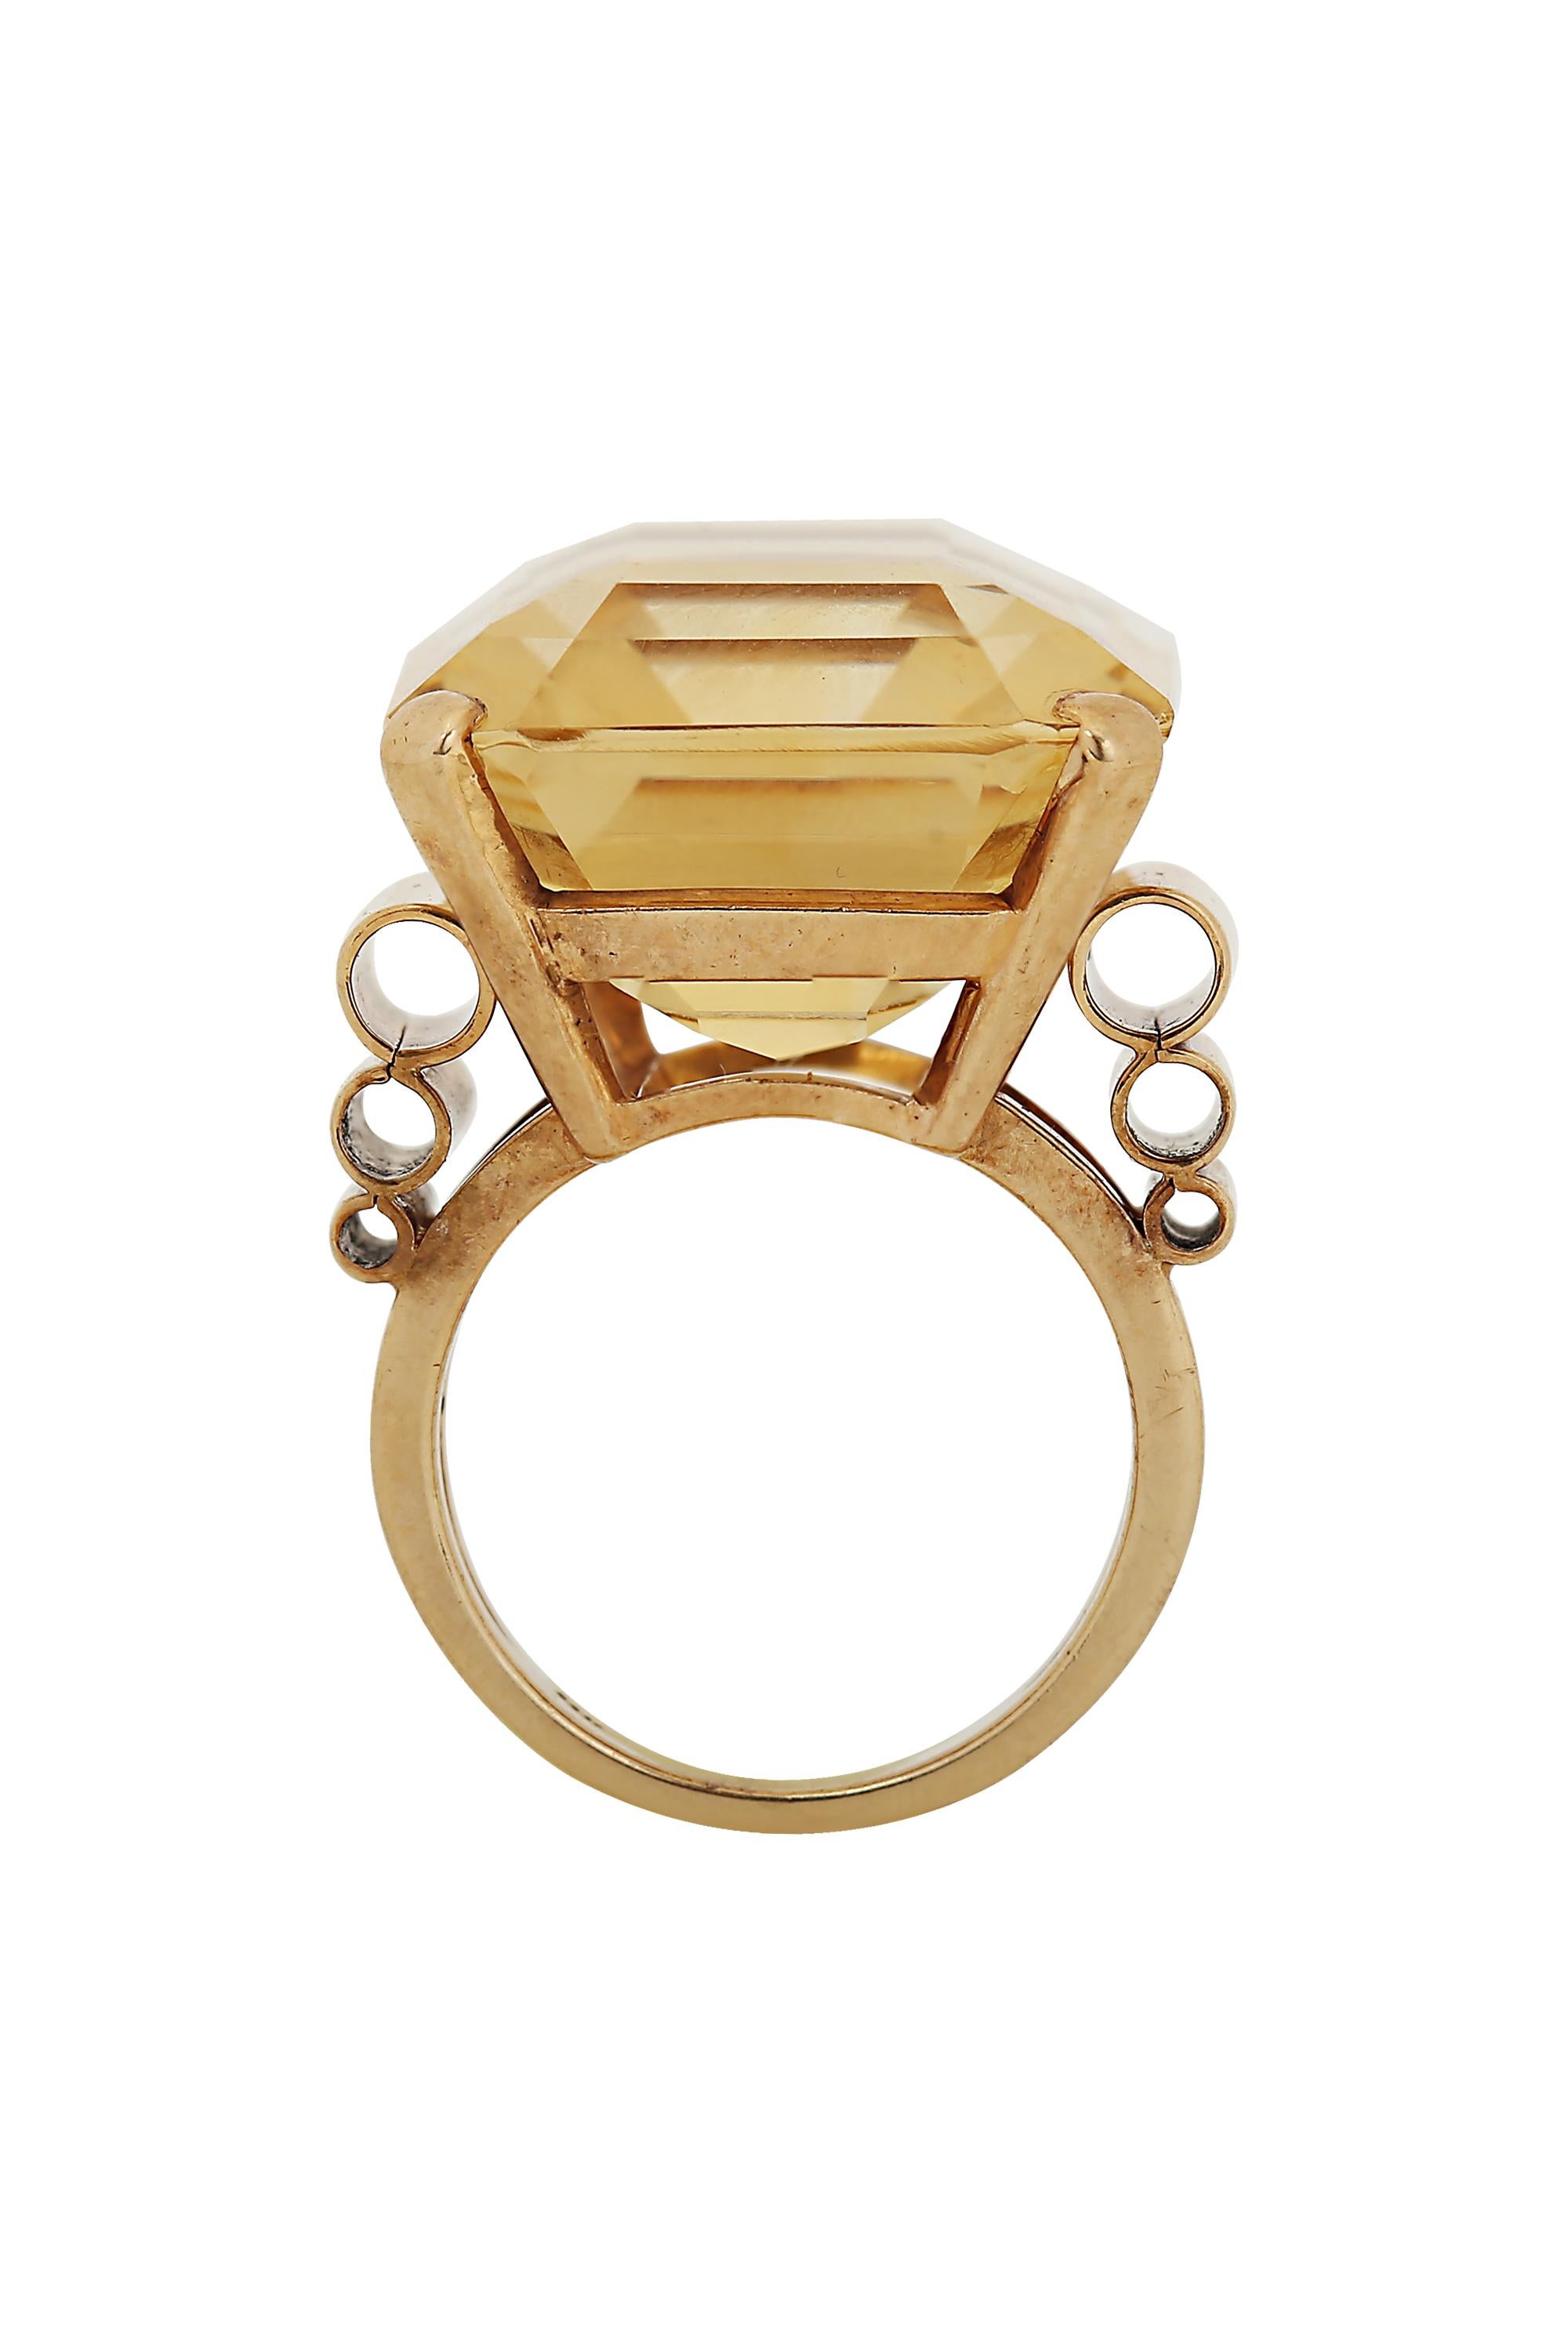 A boldly scaled Retro ring featuring a magnificent citrine of approximately 40 carats highlighted at either side by a tailored trio of graduating scrolls of gold. Currently size 6.5. This ring may be resized.